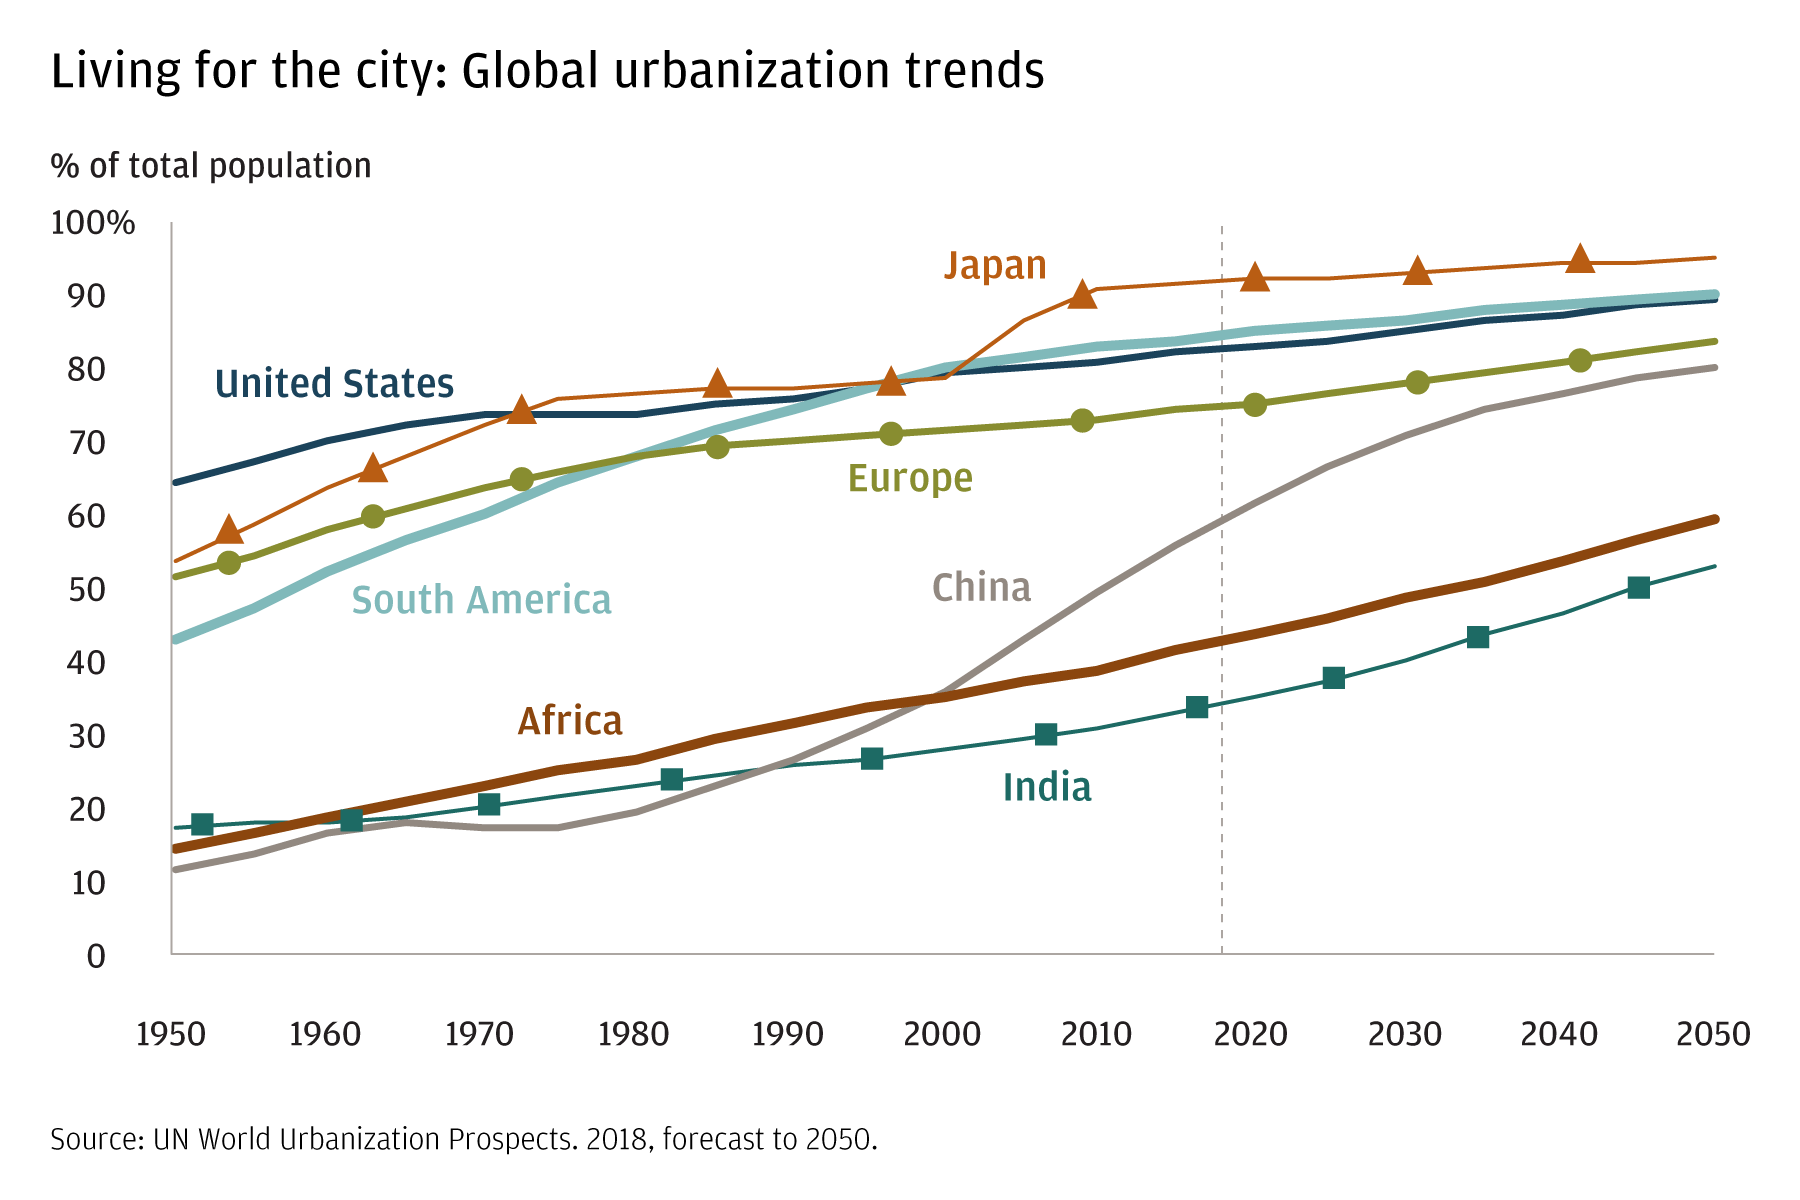 This chart displays urbanization trends from 1950 to 2050 in the United States, Japan, China, Europe, South America, Africa and India. All areas are increasing, with China’s urban population growing most rapidly.  